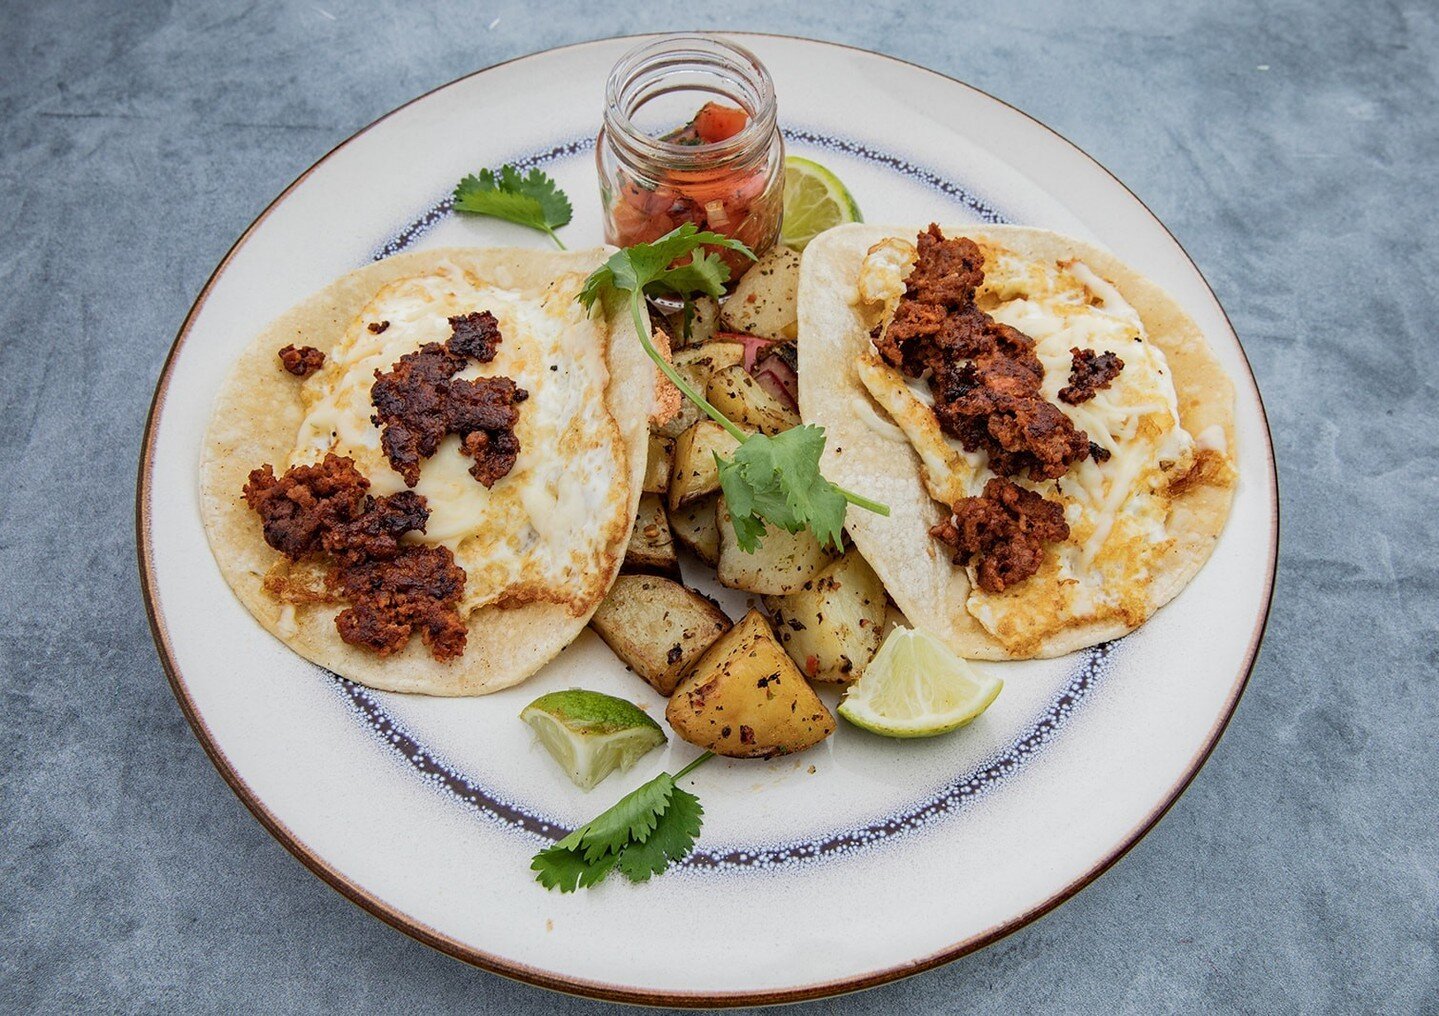 Breakfast tacos FTW 🙌🏼 
Two grilled flour tortillas filled with scrambled eggs, grilled chorizo, pepper jack cheese, and pico de Gallo. 
The perfect way to welcome the weekend in!
Happy Friday everyone 🌮